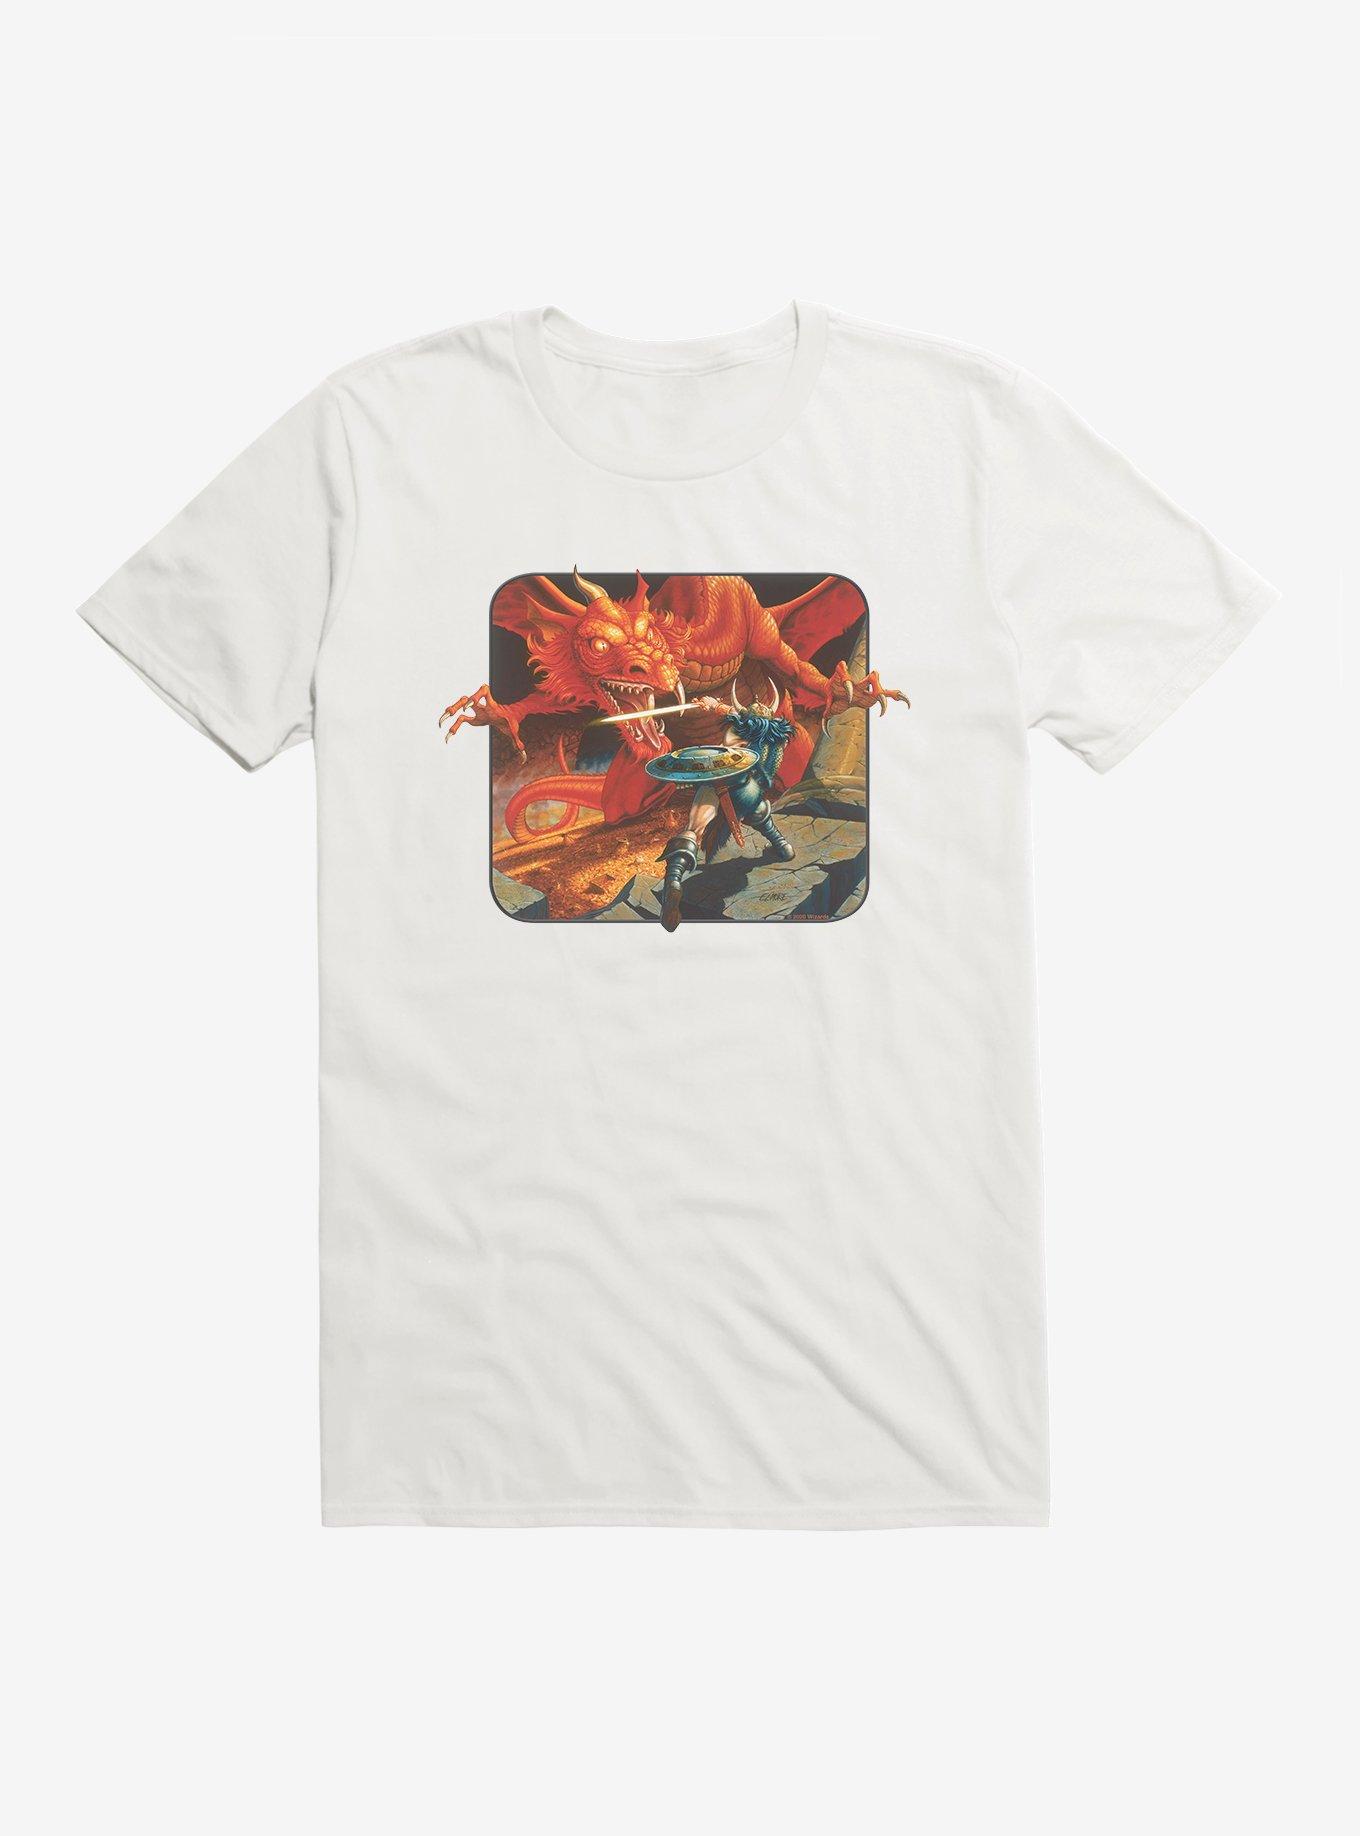 Dungeons & Dragons Elmore's Red Dragon T-Shirt | Hot Topic